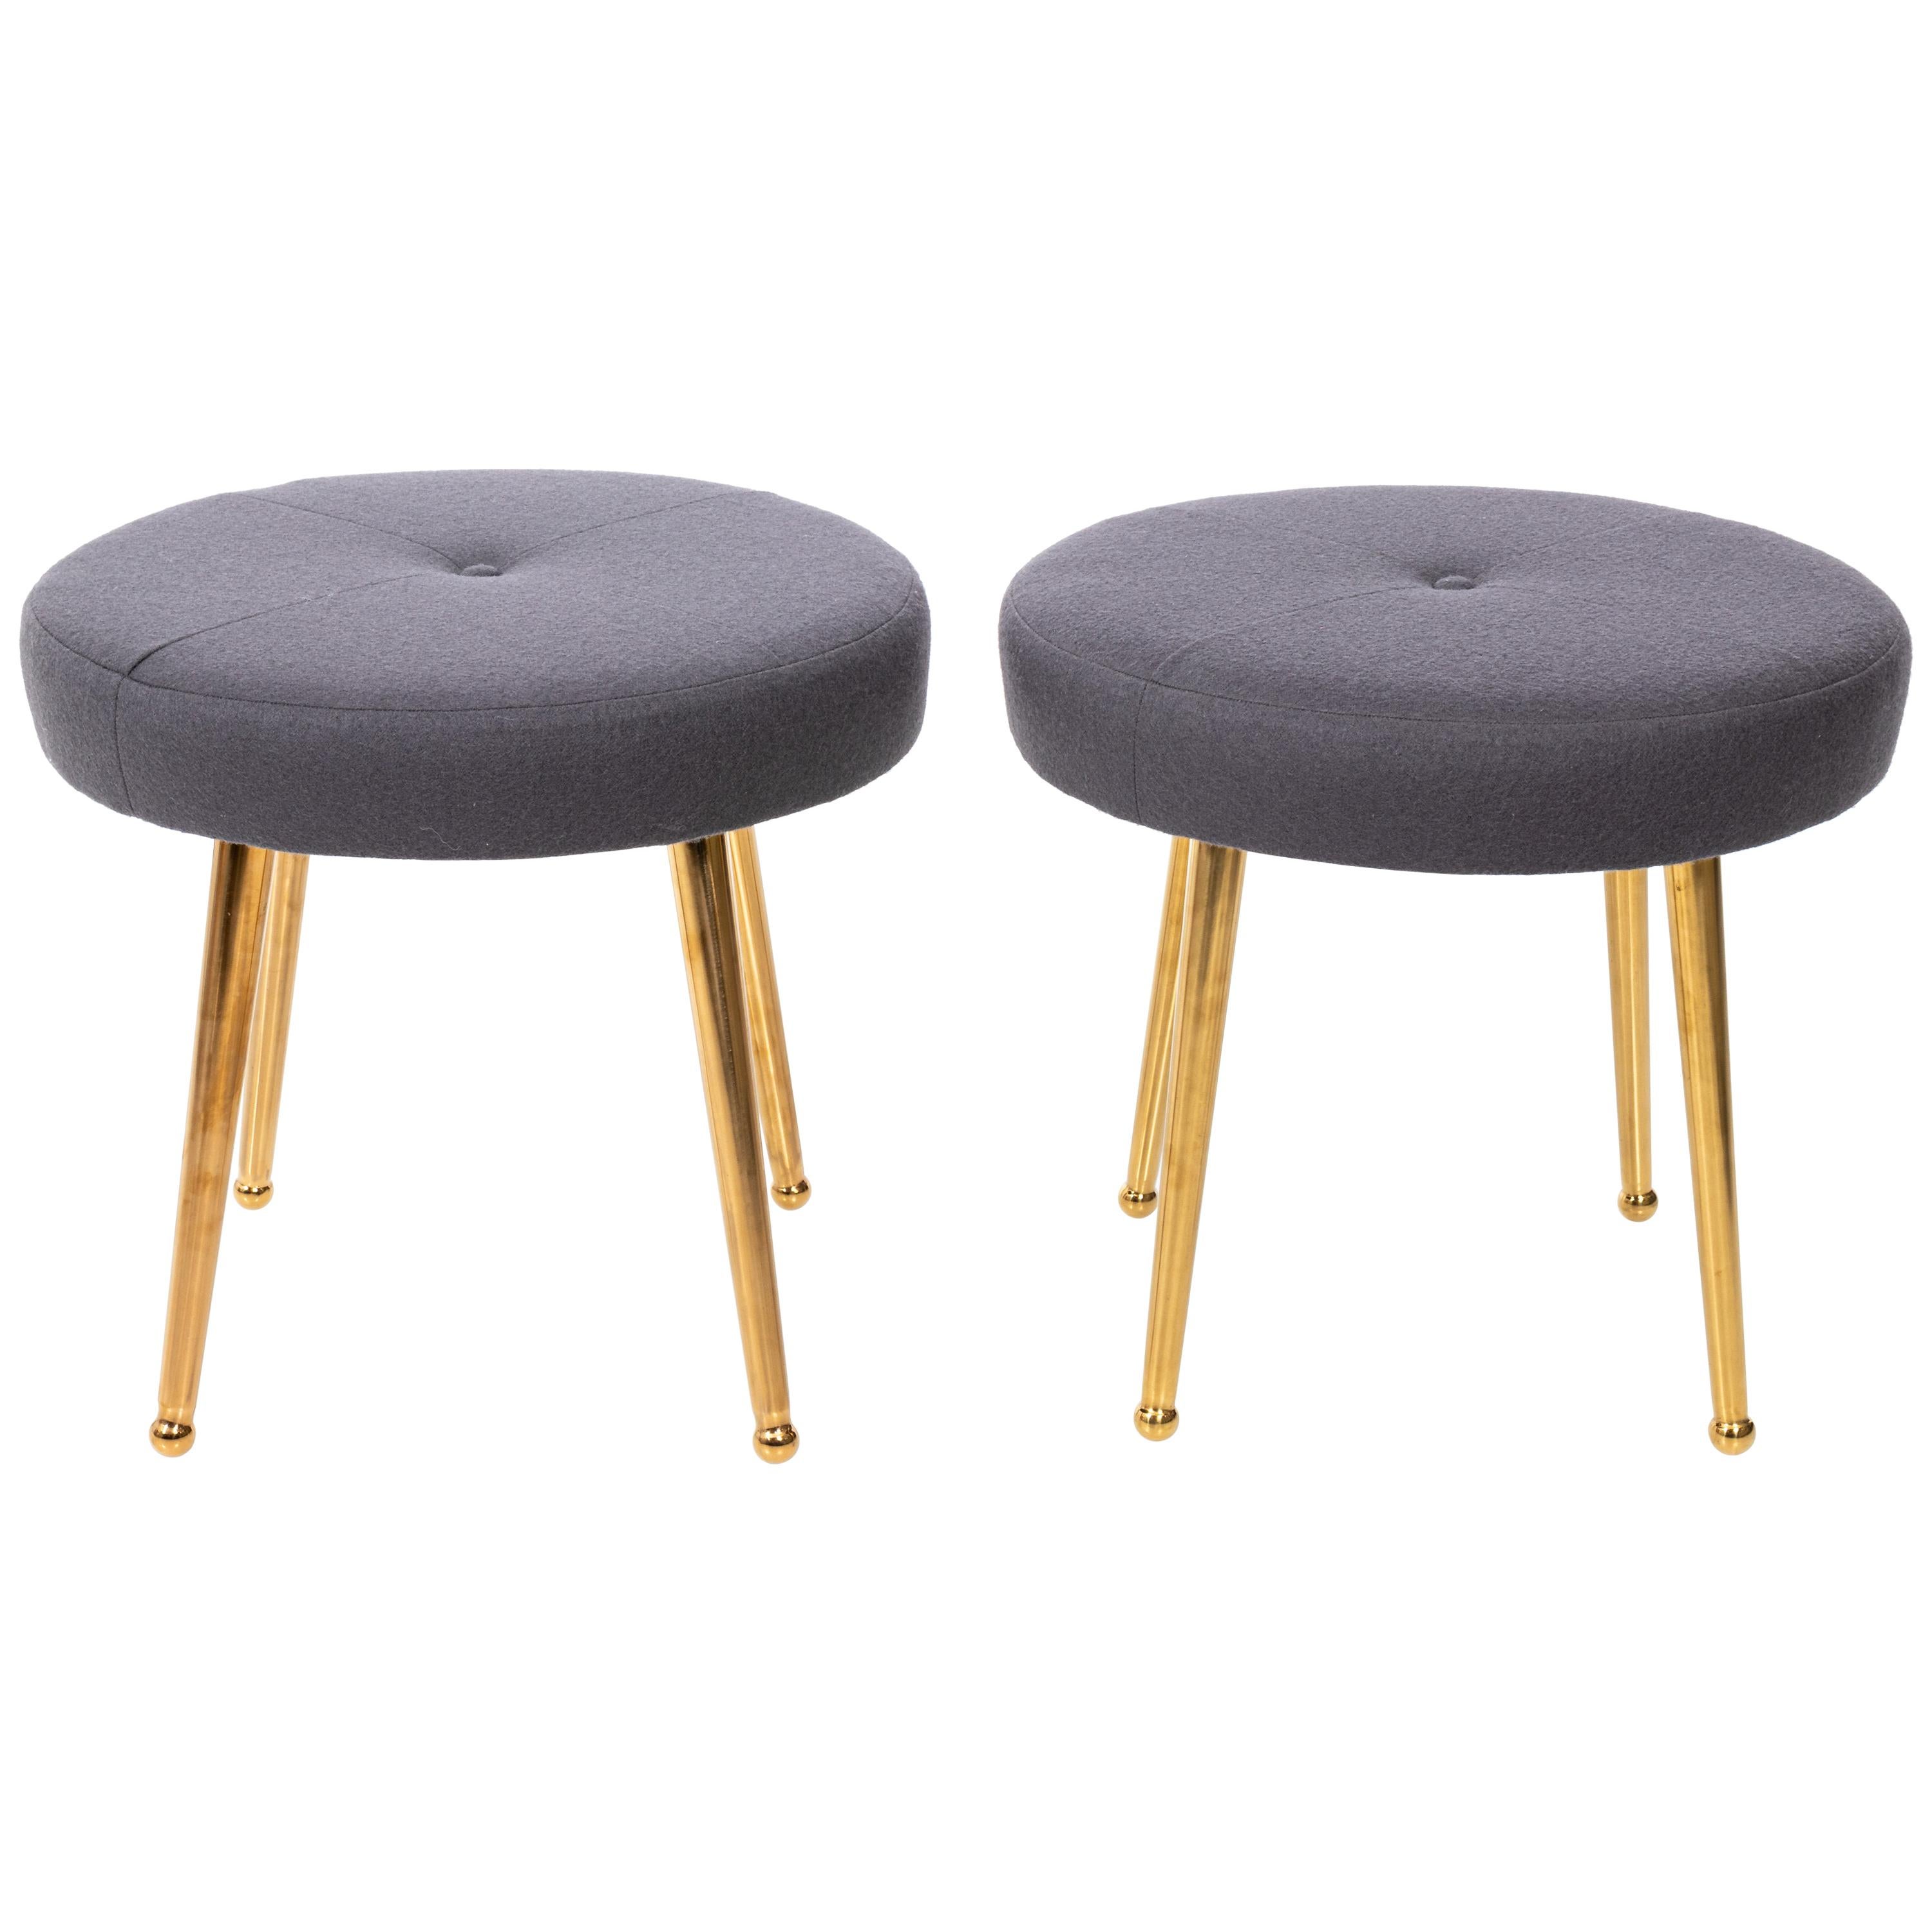 Custom Pair of Midcentury Style Round Stools with Brass Legs For Sale